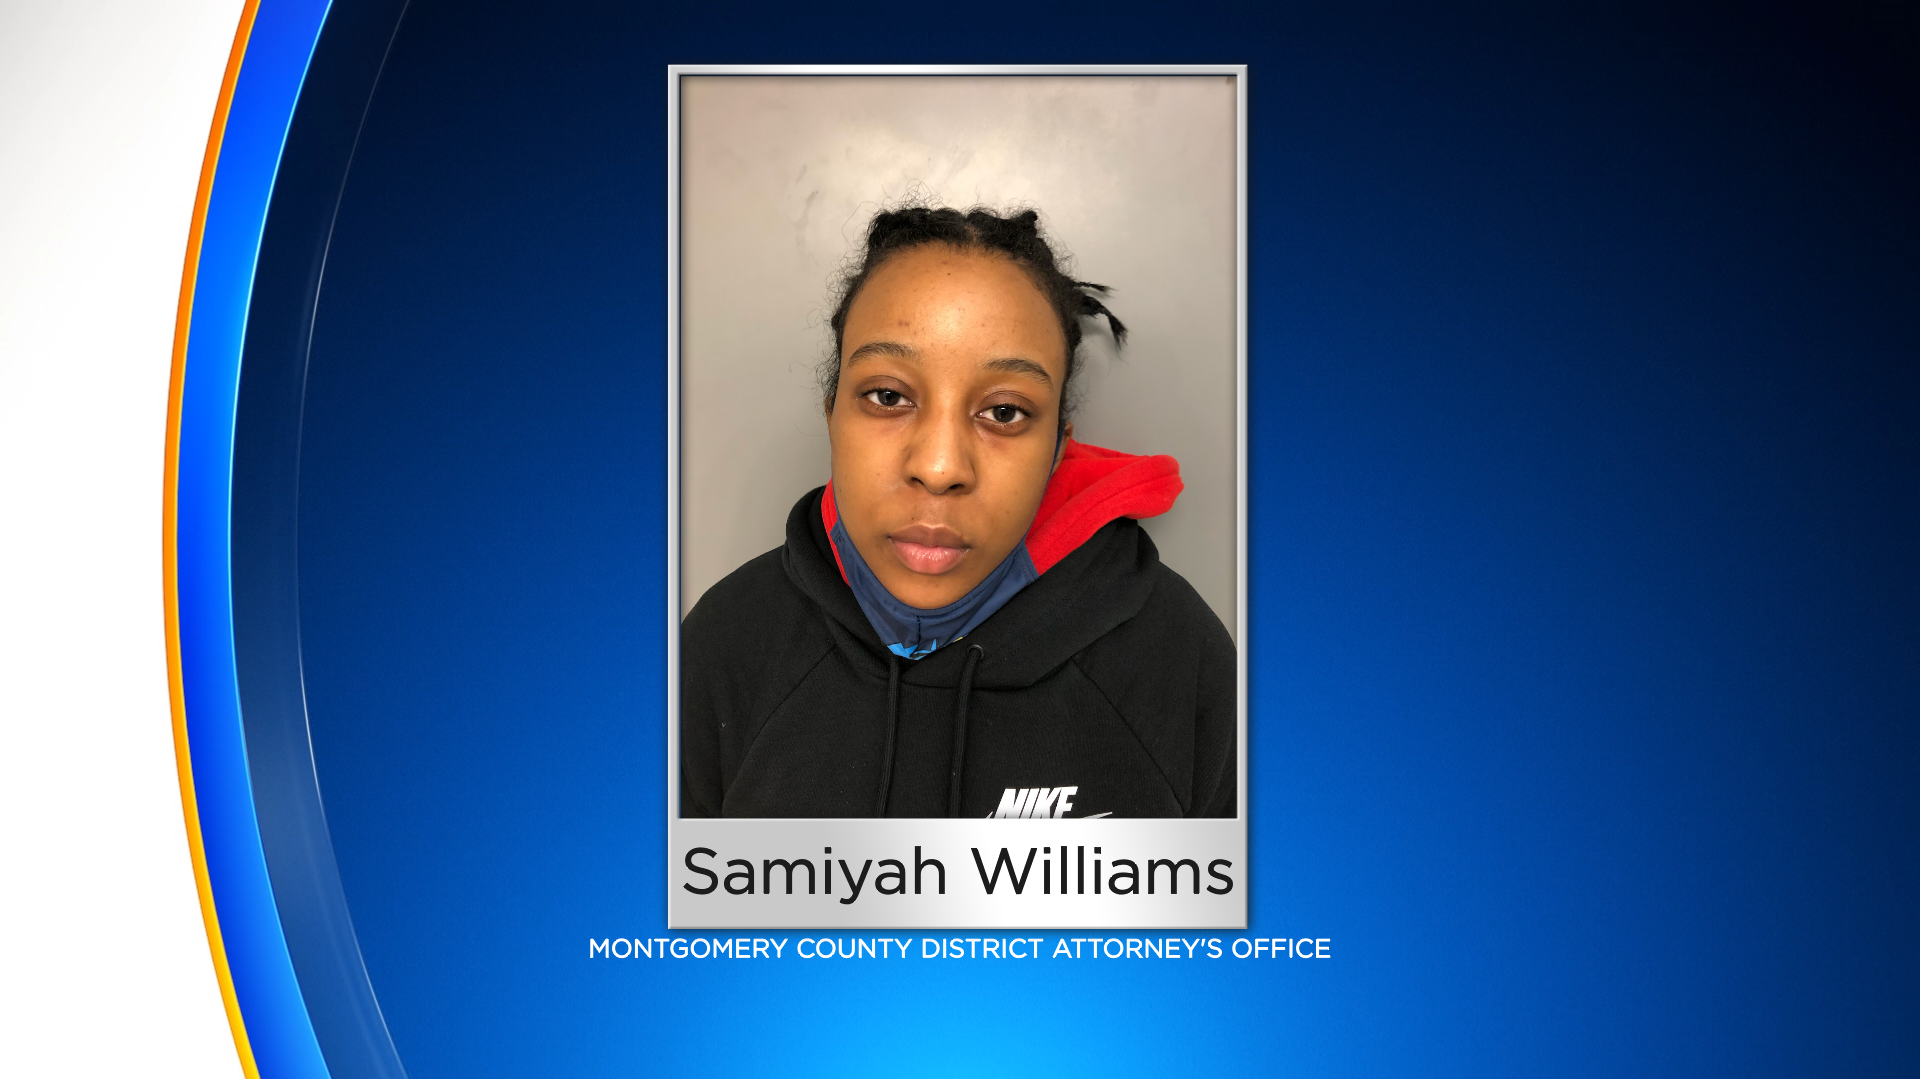 Samiyah Williams Arrested, Charged With First-Degree Murder In Connection To Killing Mother's Fiance On New Year's Eve, Officials Say